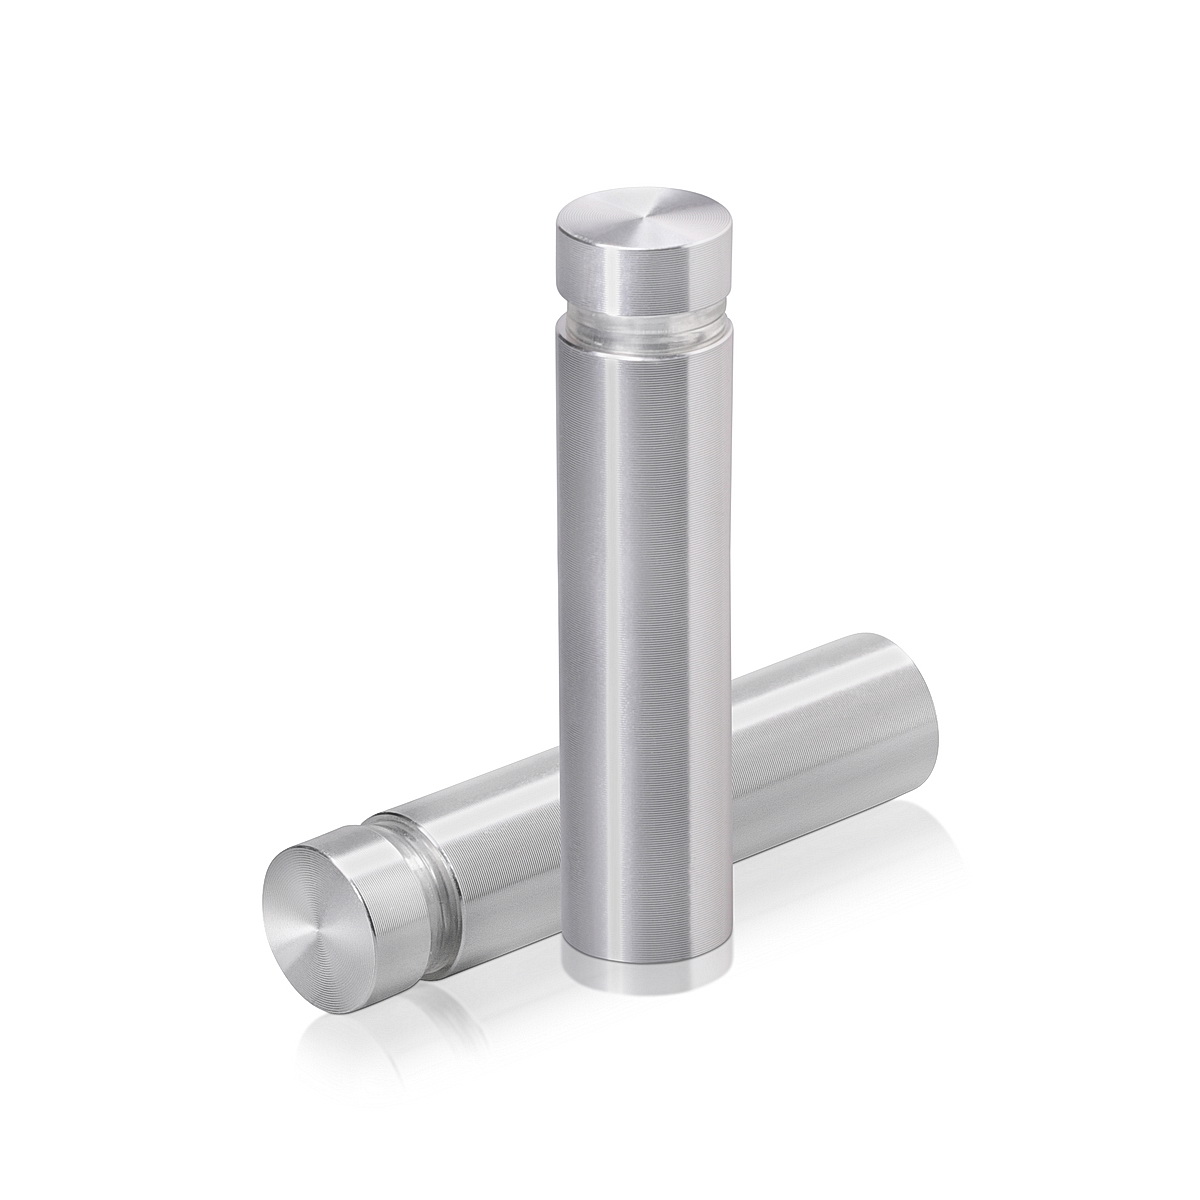 1/2'' Diameter X 1-3/4'' Barrel Length, Aluminum Flat Head Standoffs, Shiny Anodized Finish Easy Fasten Standoff (For Inside / Outside use) Tamper Proof Standoff [Required Material Hole Size: 3/8'']